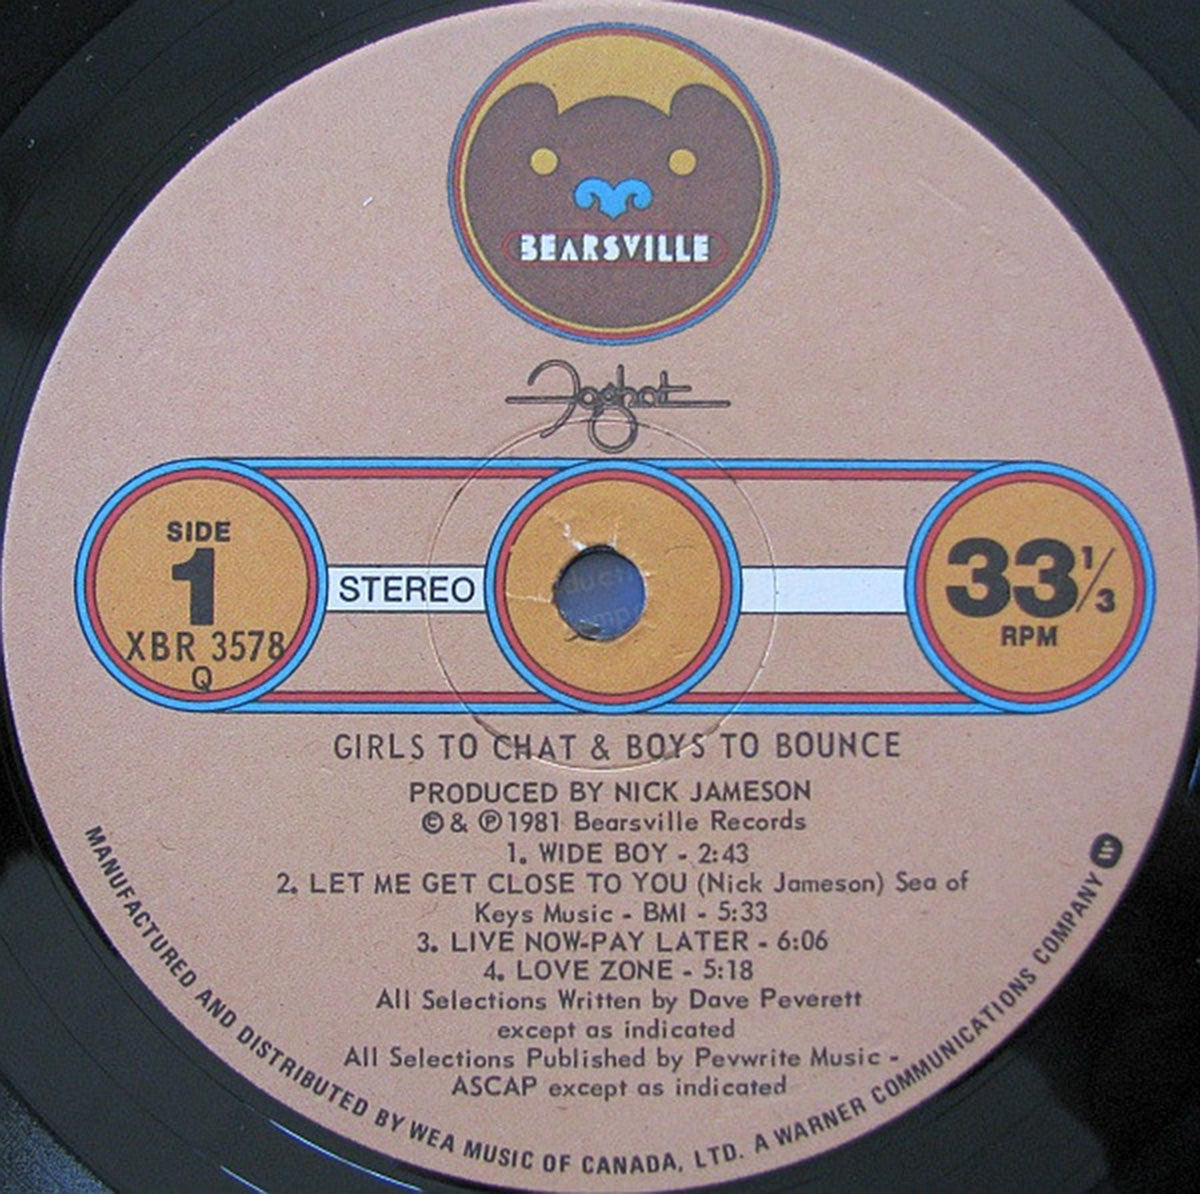 Foghat – Girls To Chat & Boys To Bounce - 1981